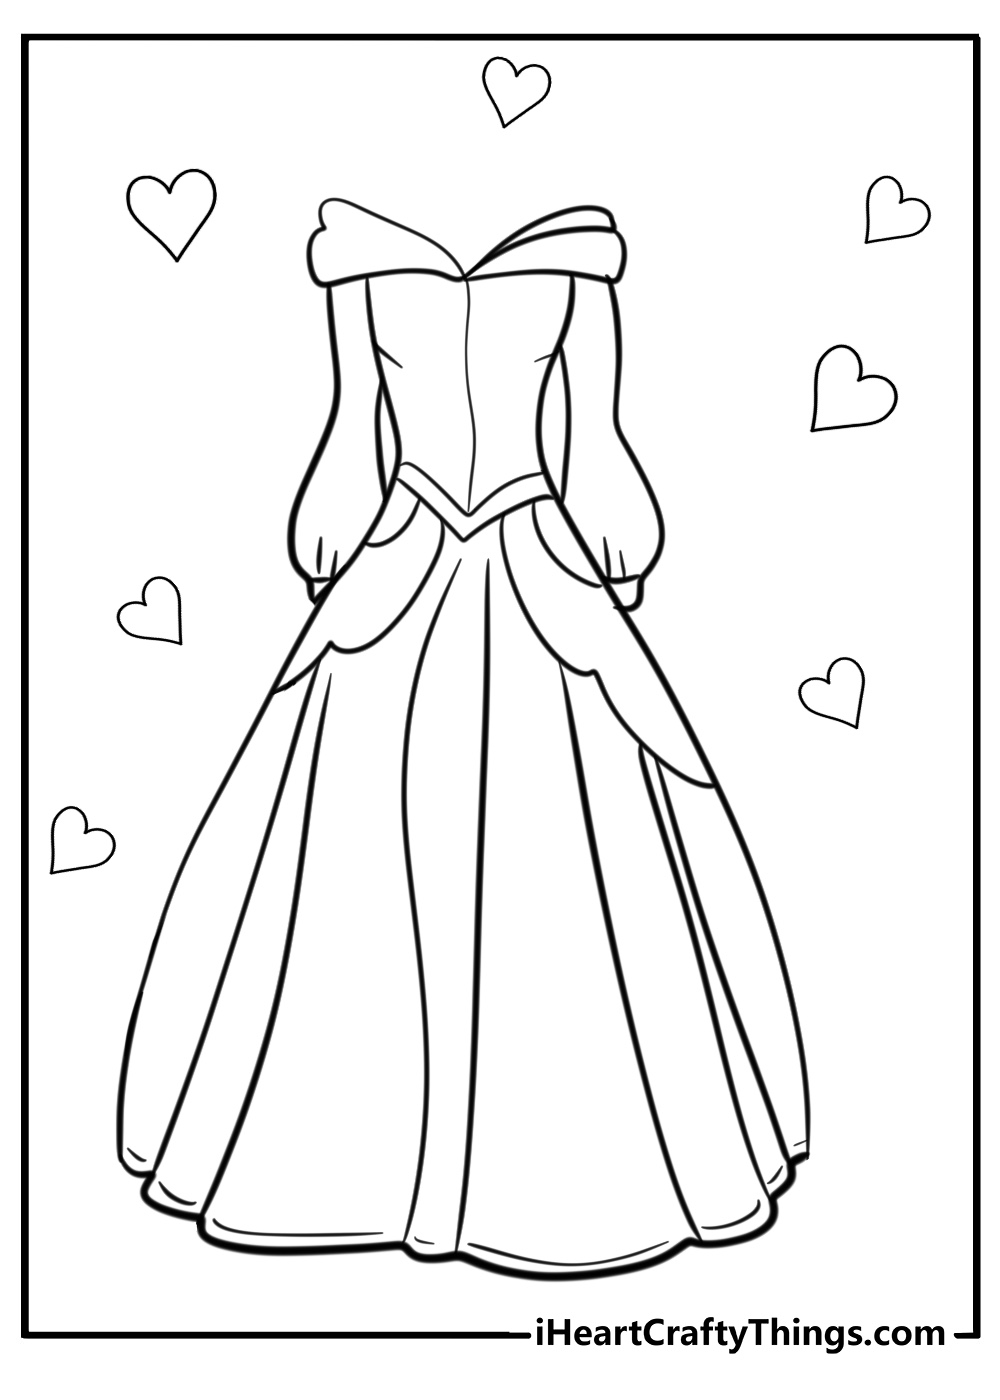 Easy neoclassical dress coloring page design coloring page for kids